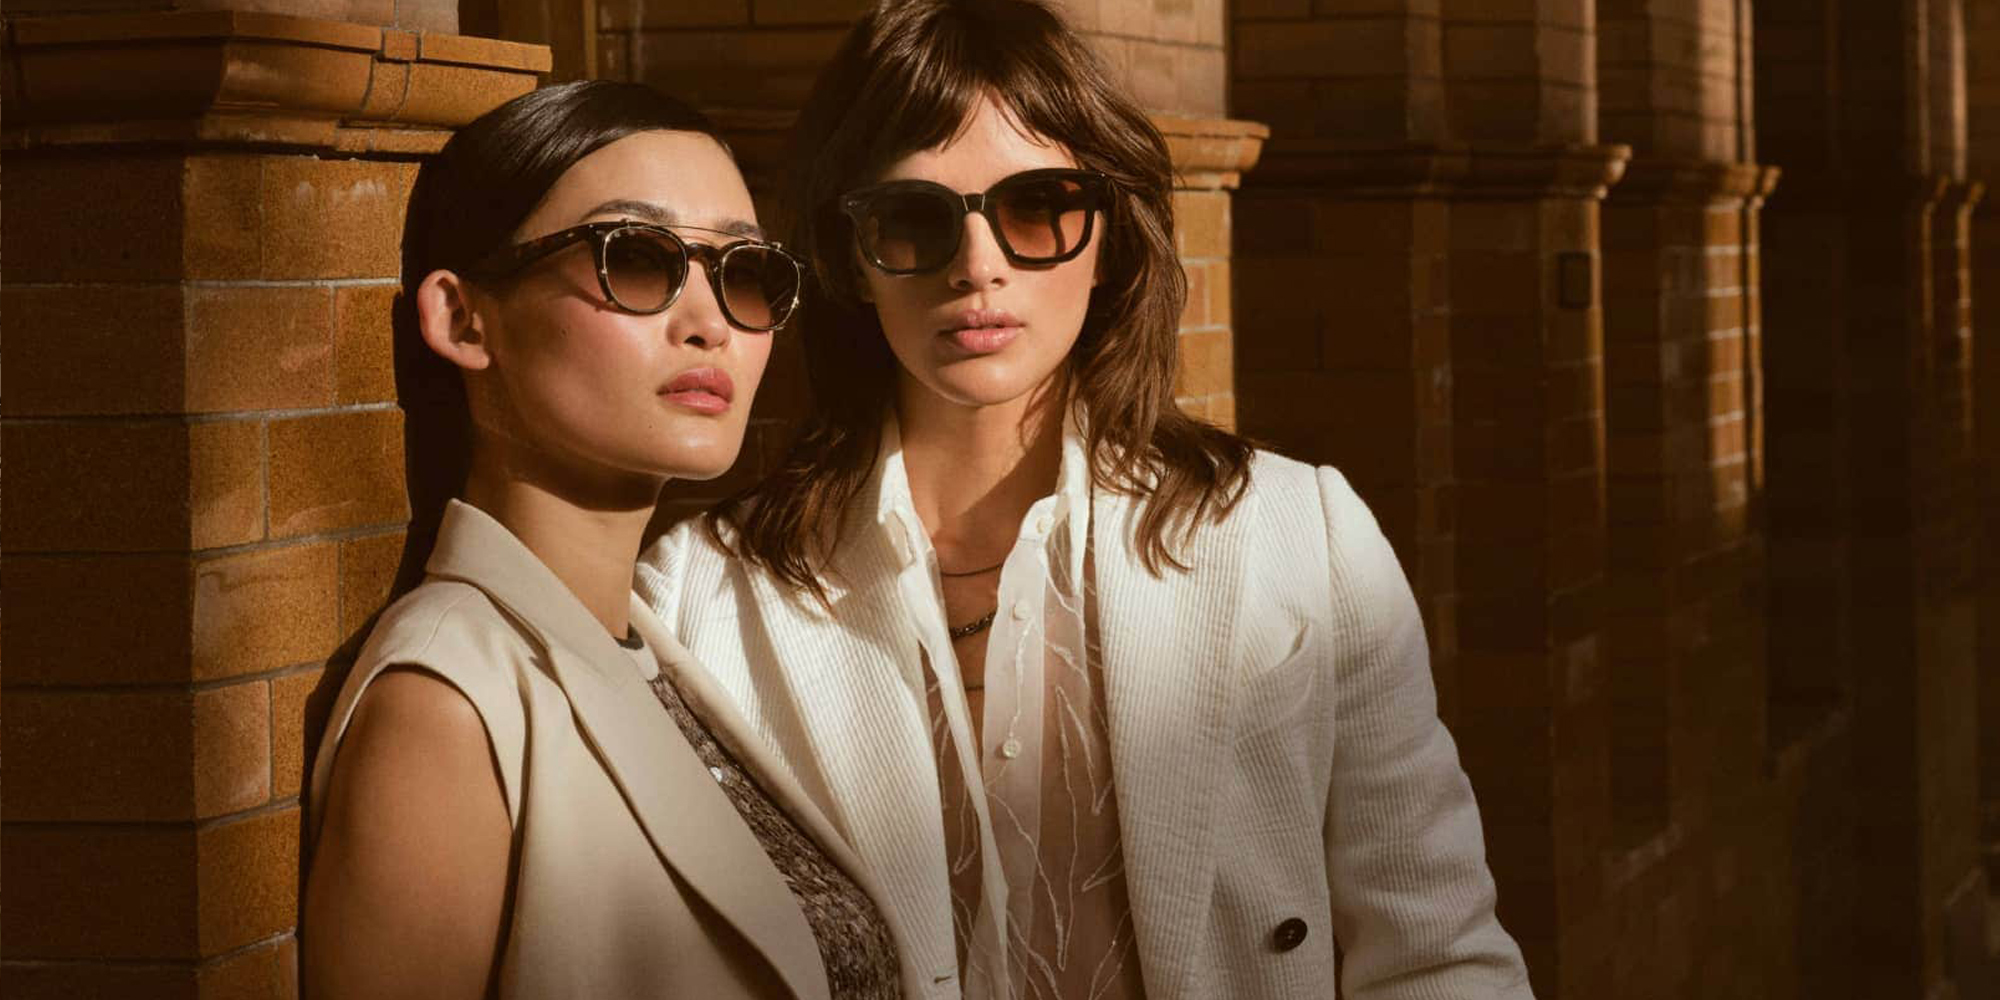 BRUNELLO CUCINELLI X OLIVER PEOPLES SUMMER 2022 COLLECTION FILM